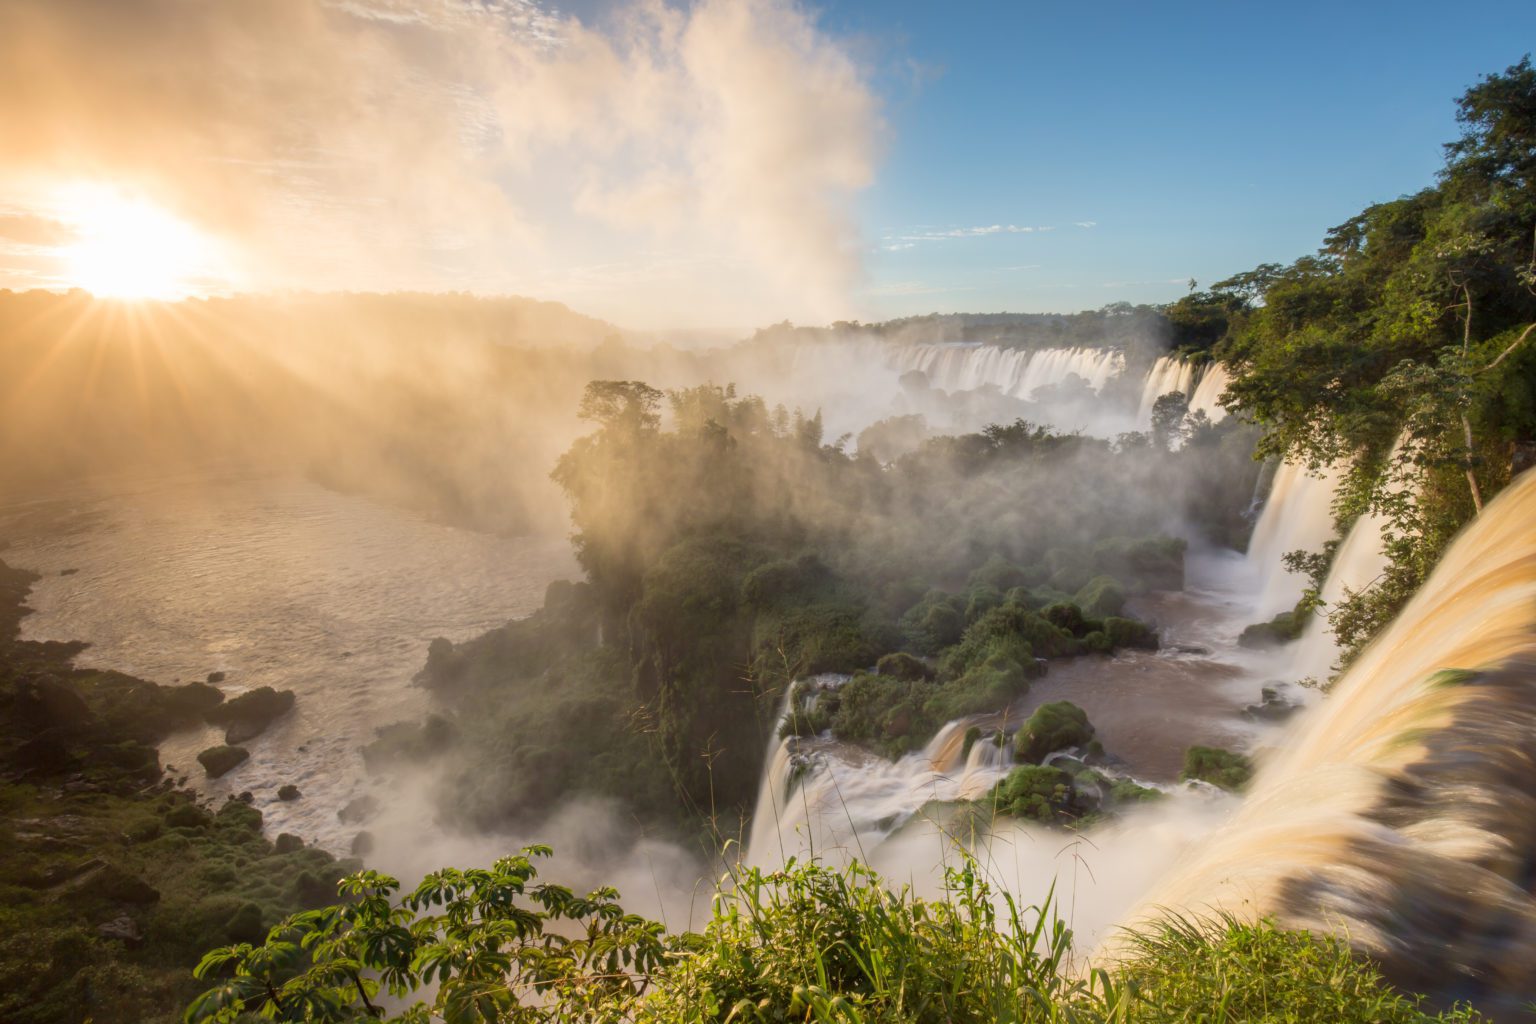 Sunrise over the falls with gushing water, greenery and gorgeous sky